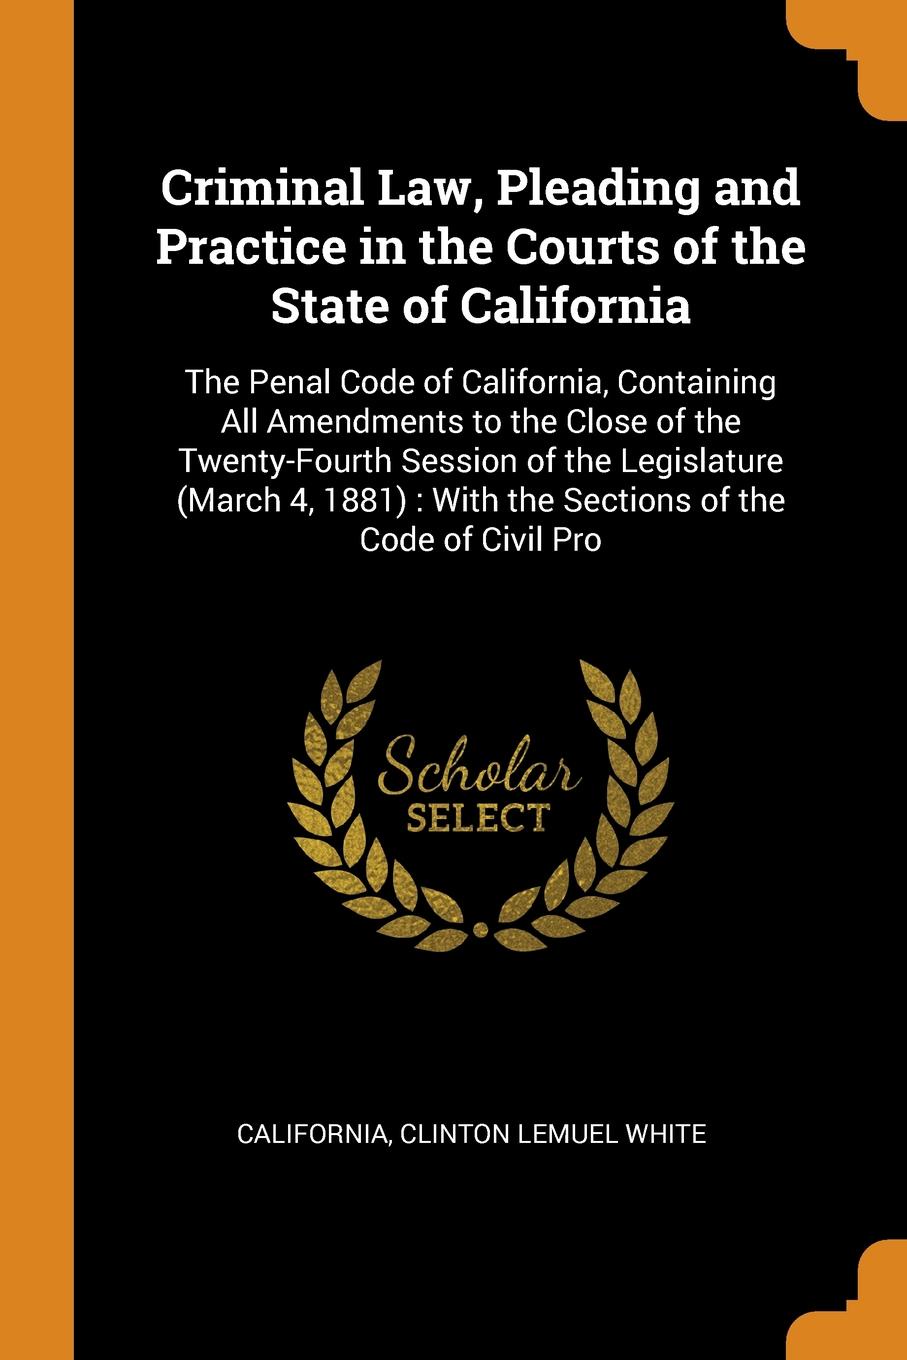 Criminal Law, Pleading and Practice in the Courts of the State of California. The Penal Code of California, Containing All Amendments to the Close of the Twenty-Fourth Session of the Legislature (March 4, 1881) : With the Sections of the Code of C...